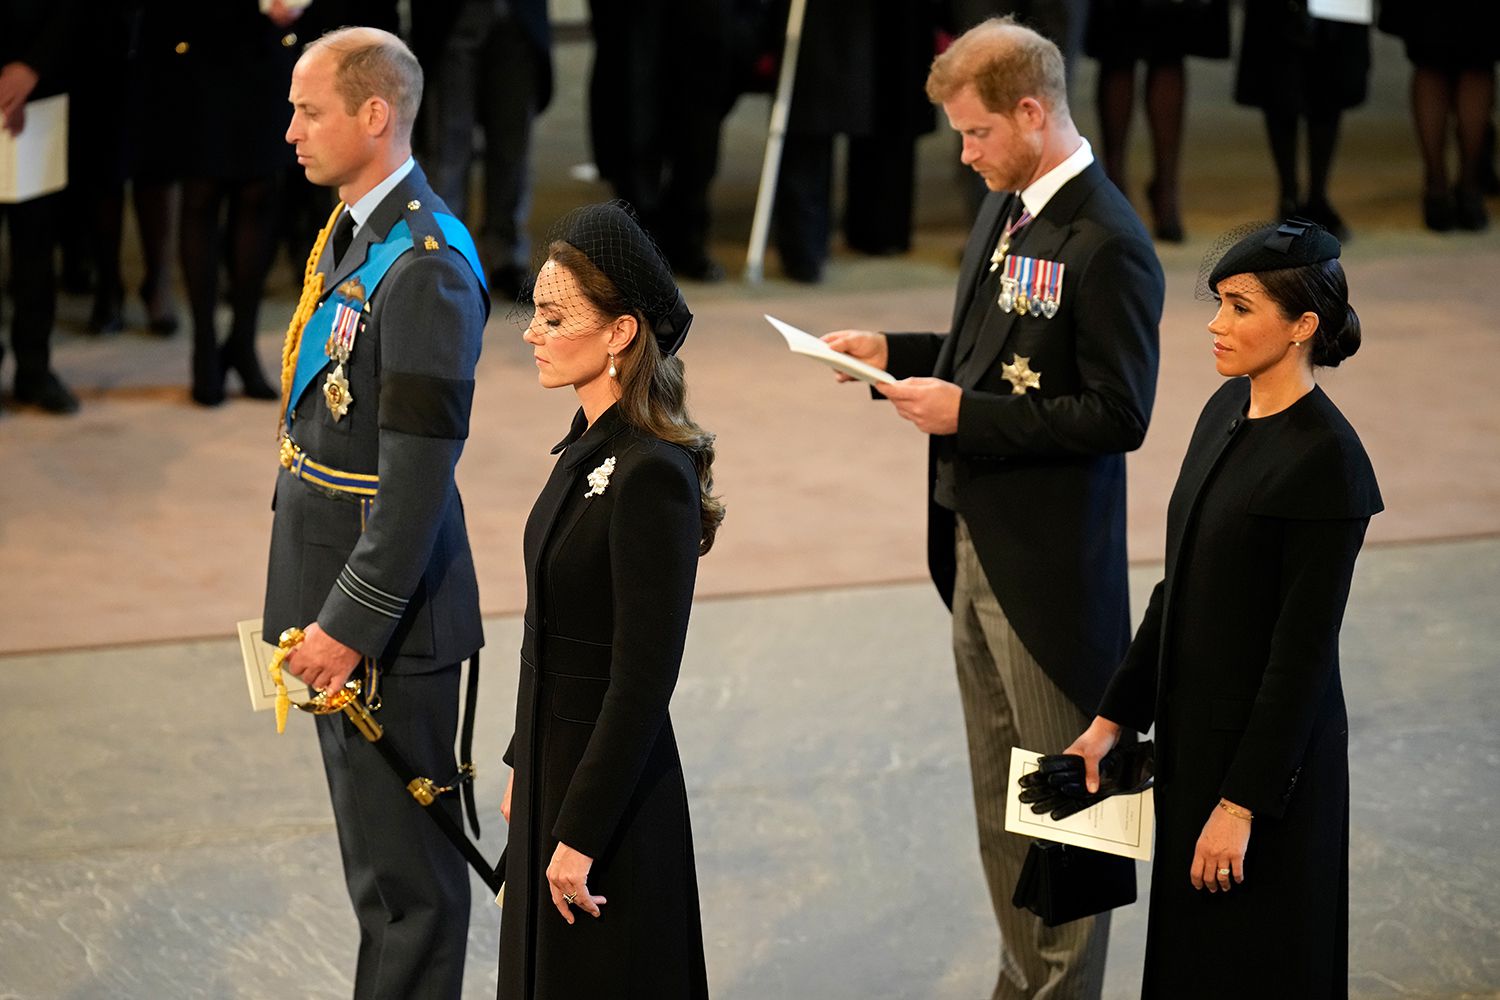 Prince WIlliam,Harry, Kate Middleton and Meghan Markle